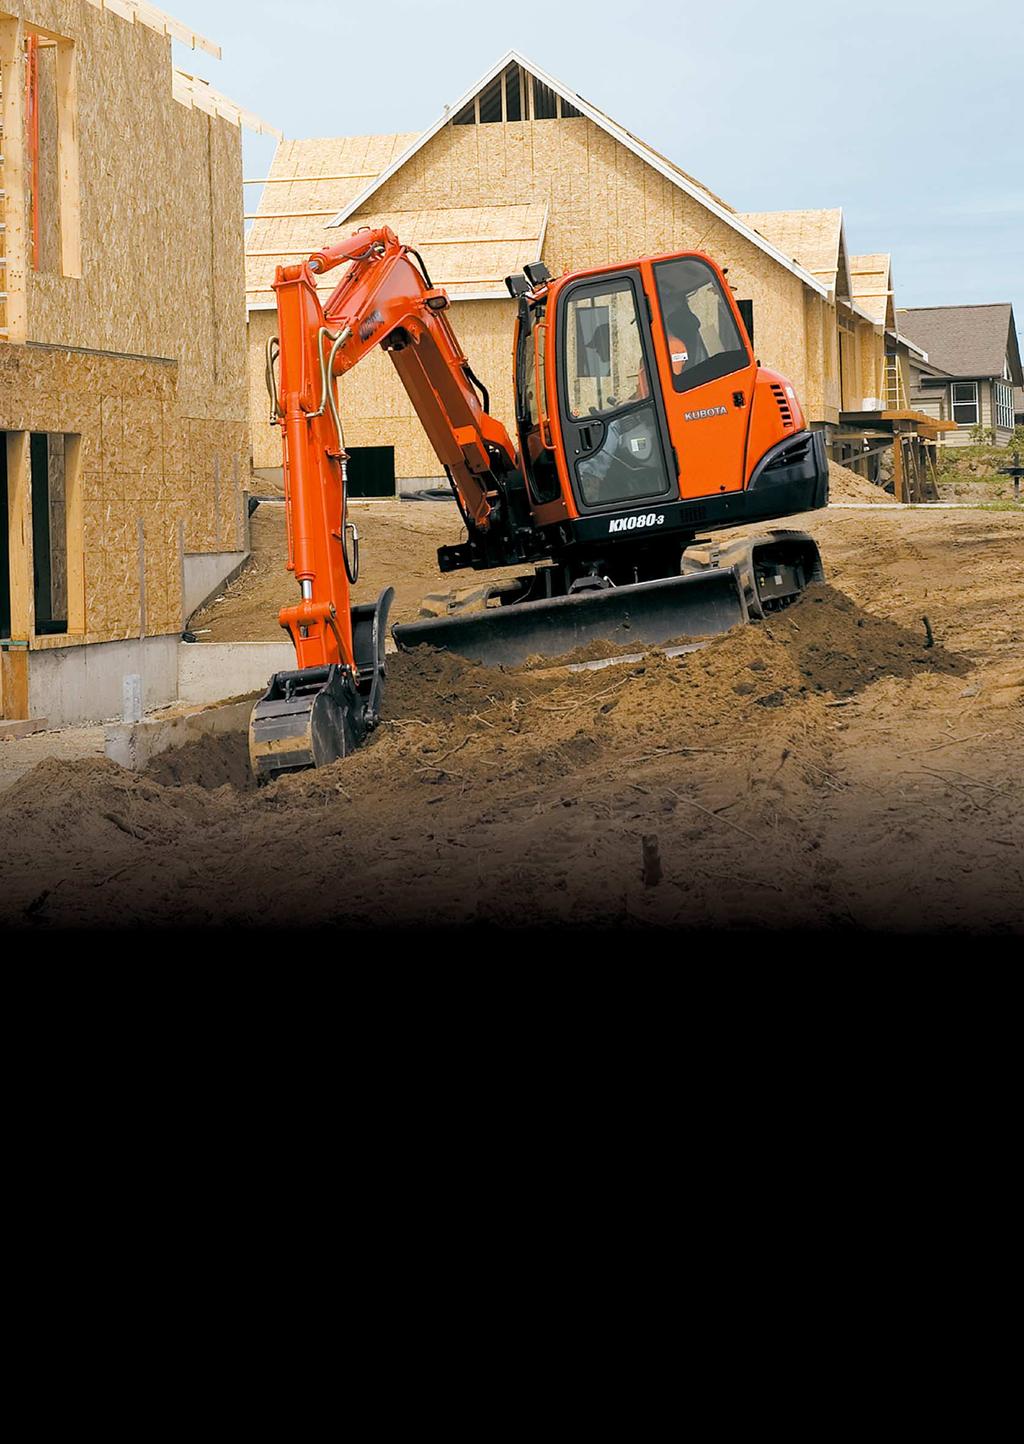 Kubota unearths its largest, most advanced Utility Class excavator. Achieve industrial performance in urban environments.